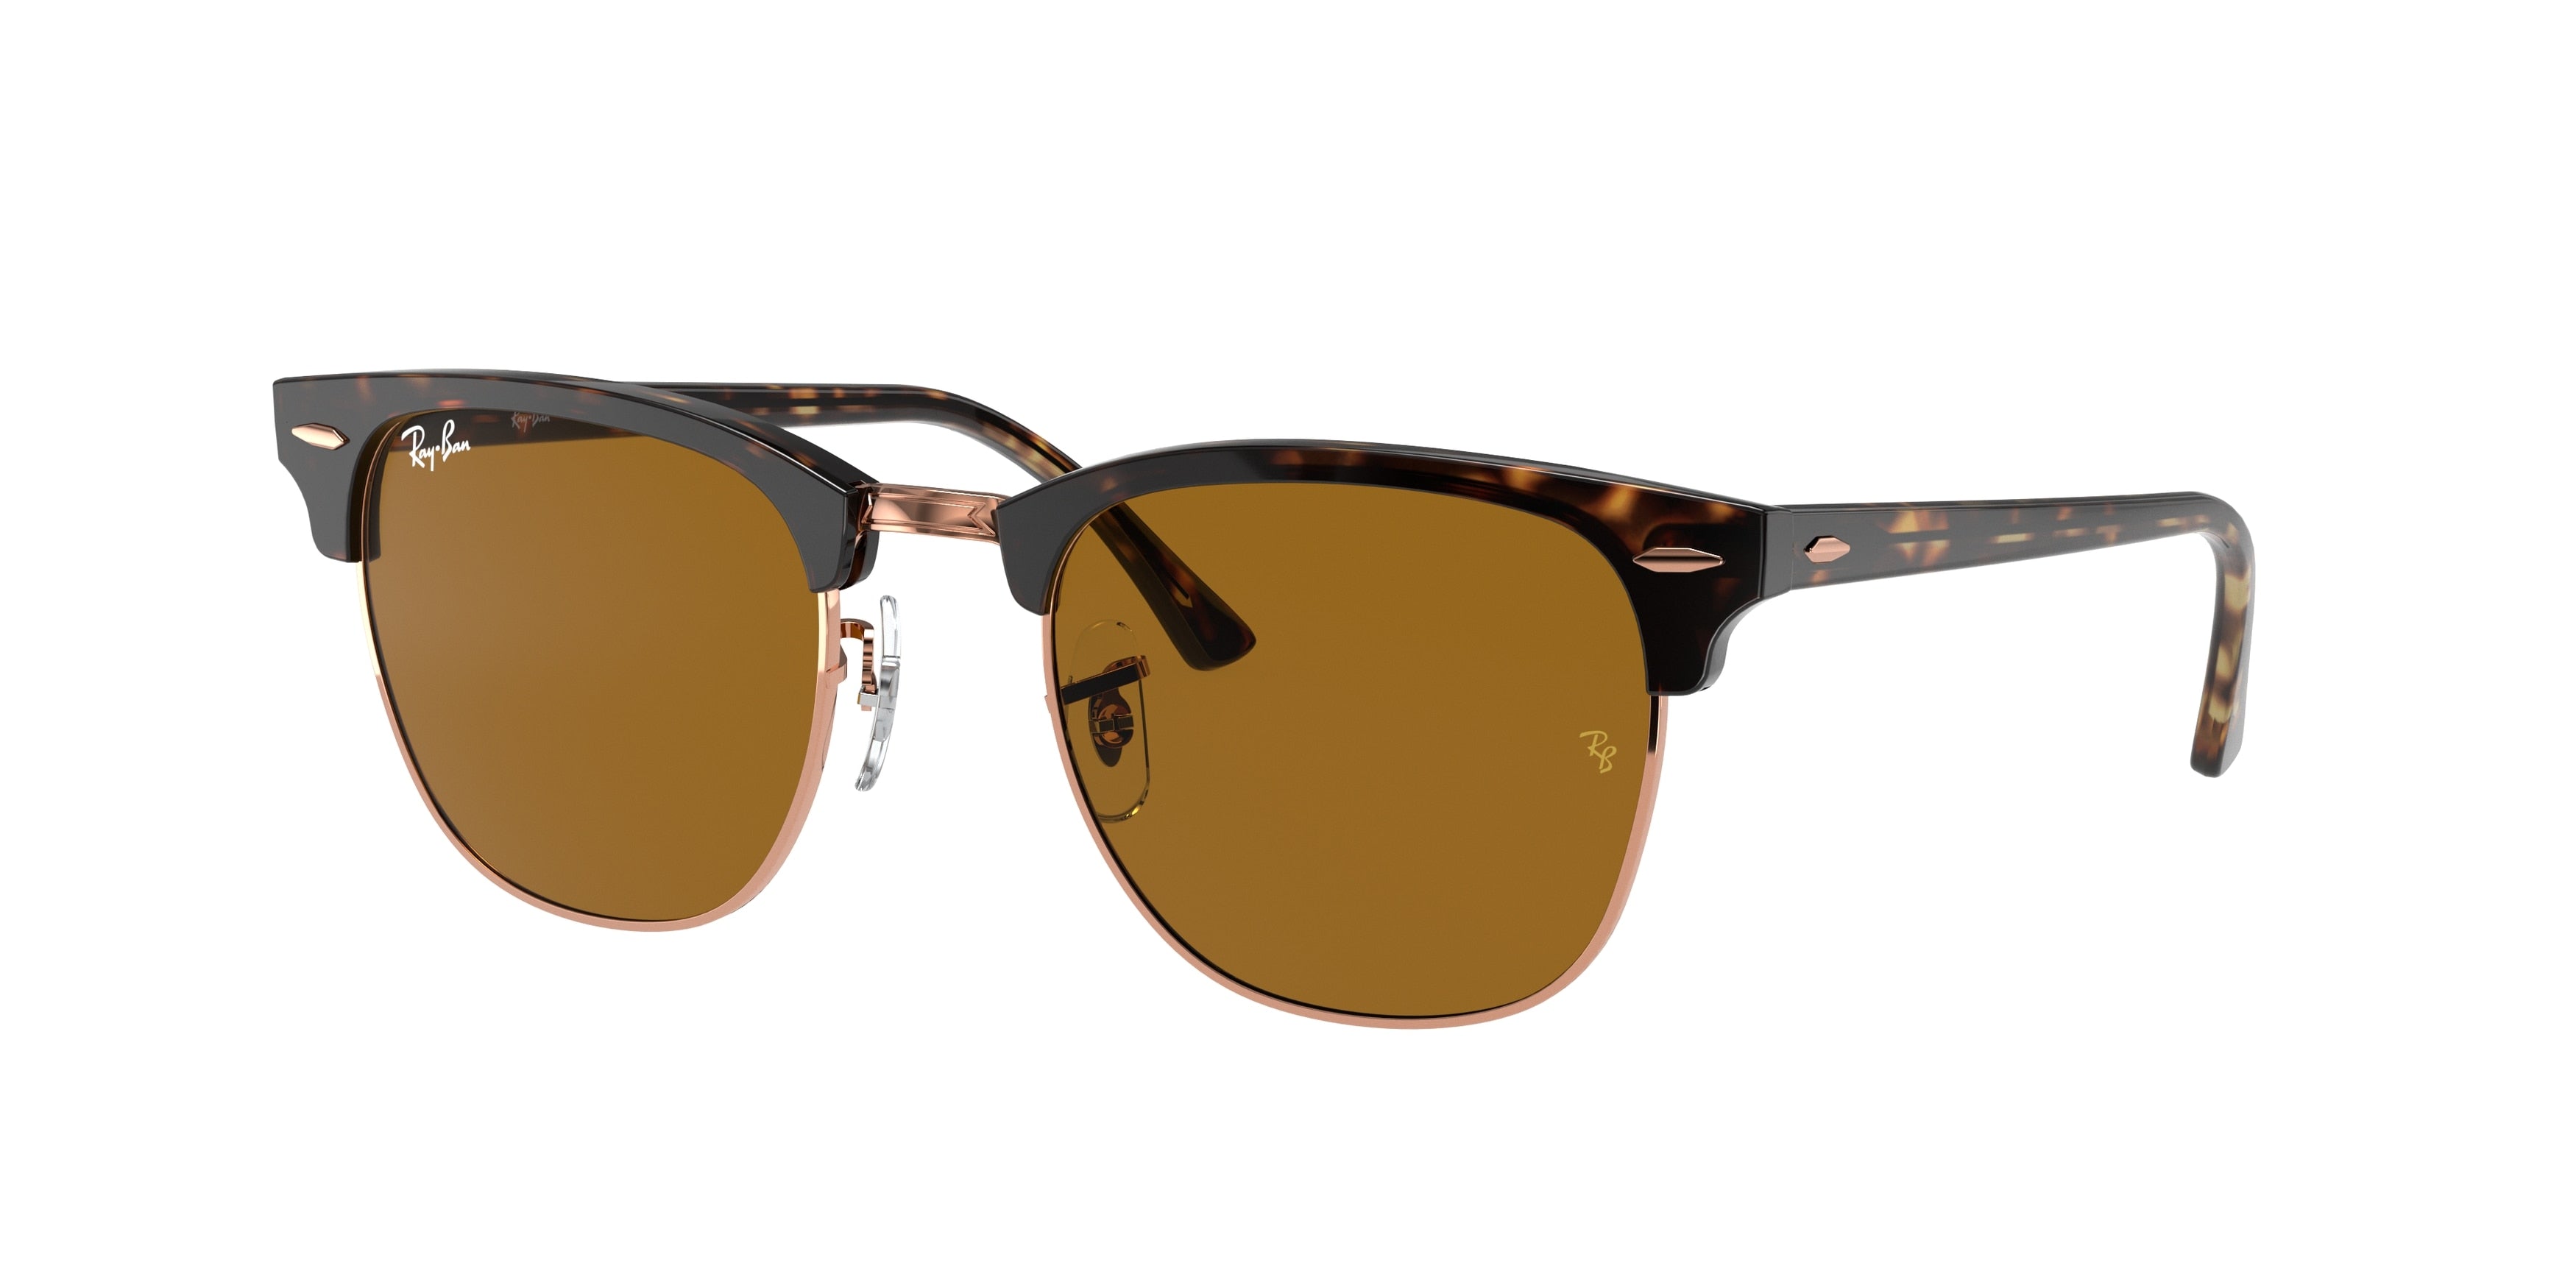 Ray-Ban CLUBMASTER LOW BRIDGE FIT RB3016F Square Sunglasses  130933-Havana 55-145-19 - Color Map Tortoise